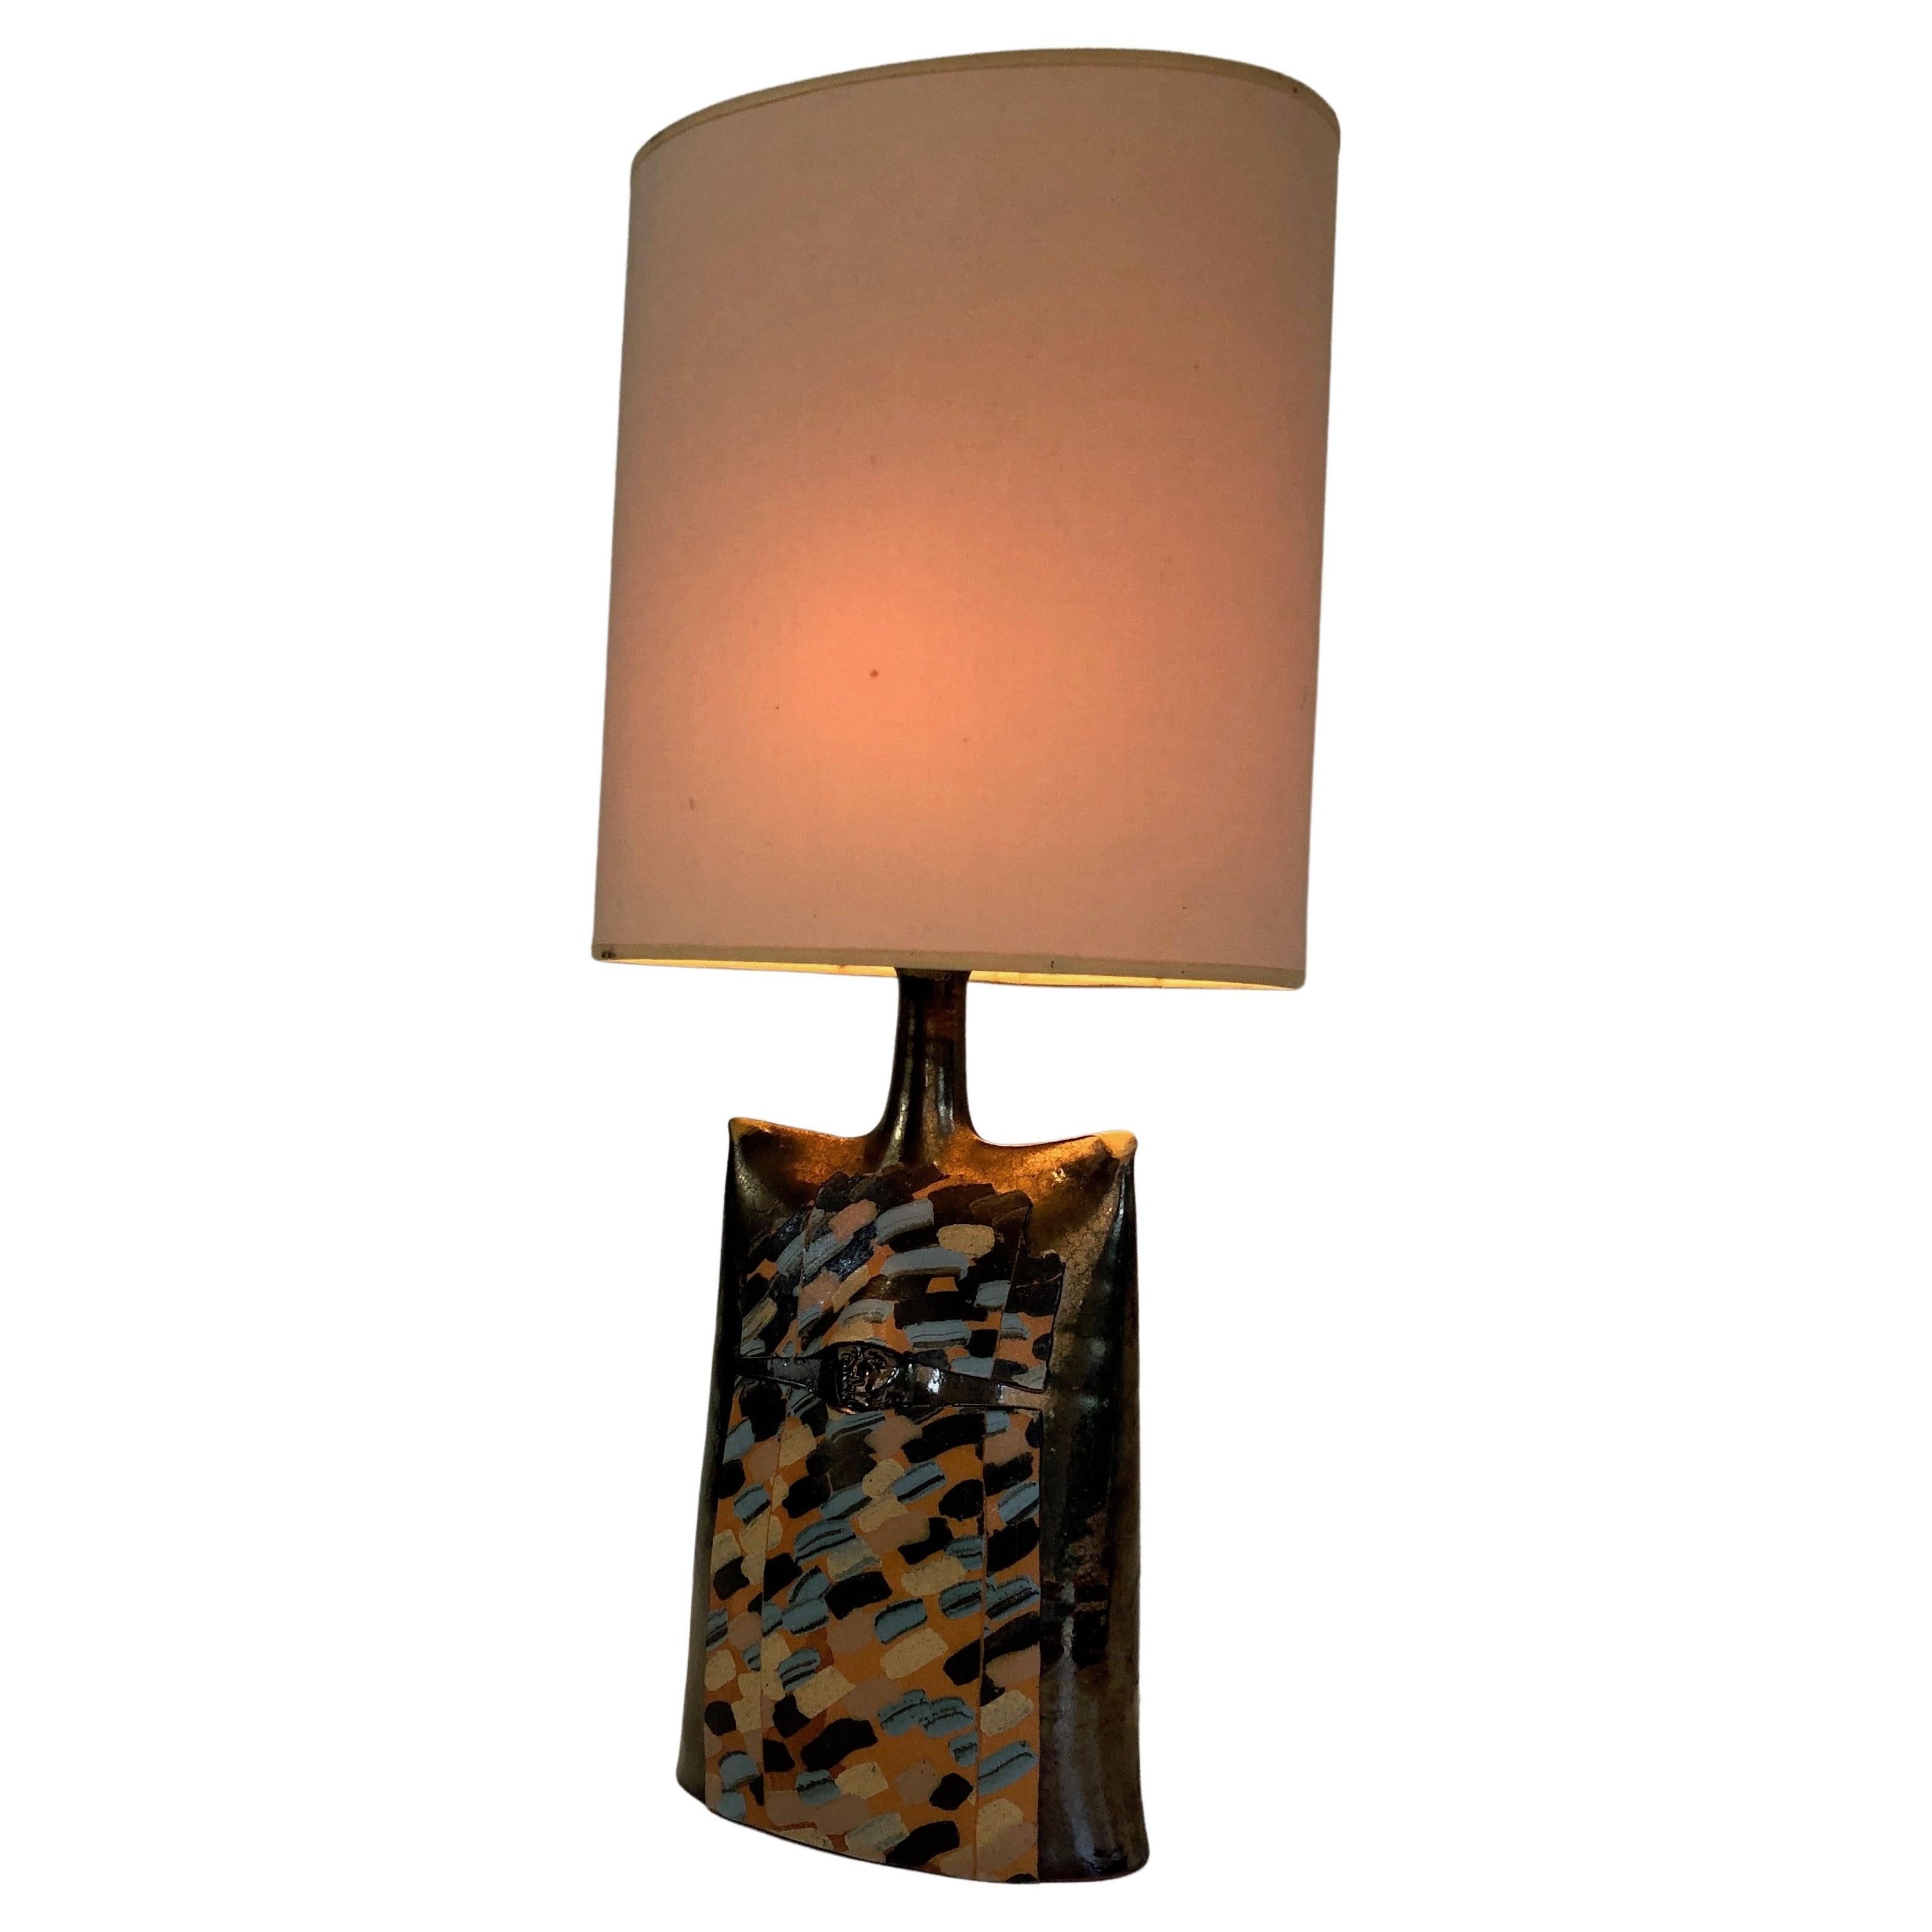 Colored Ceramic Table Lamp with a Face in Relief, This is a French Work, Circa 1